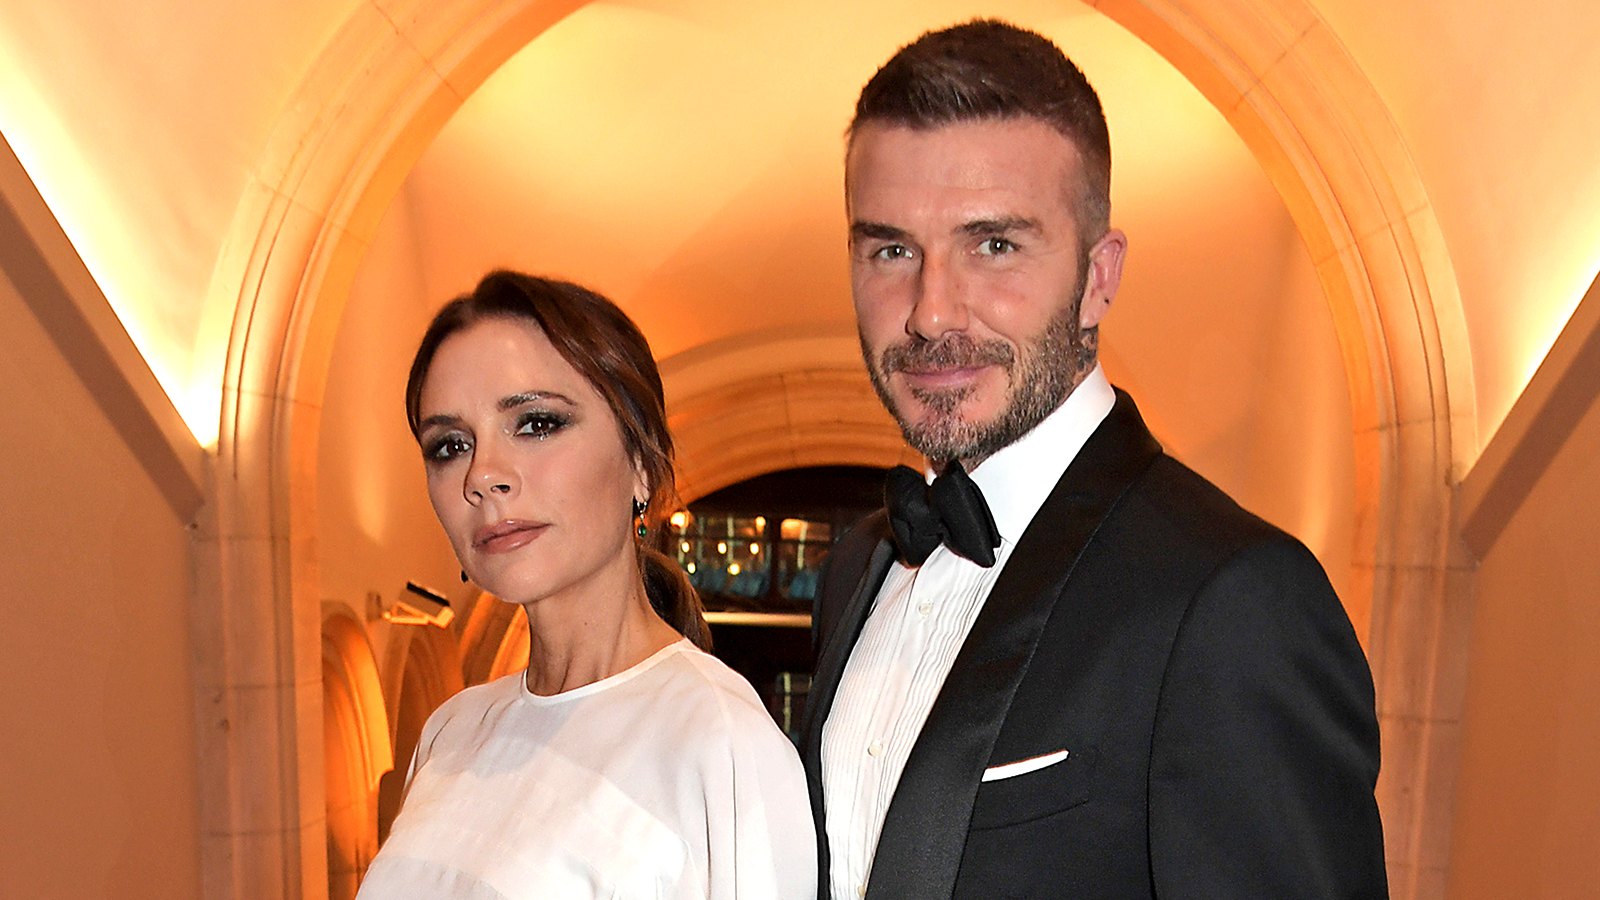 David Beckham Proves He's the Spice Girls' No. 1 Fan With New 'Posh' Tattoo for Wife Victoria